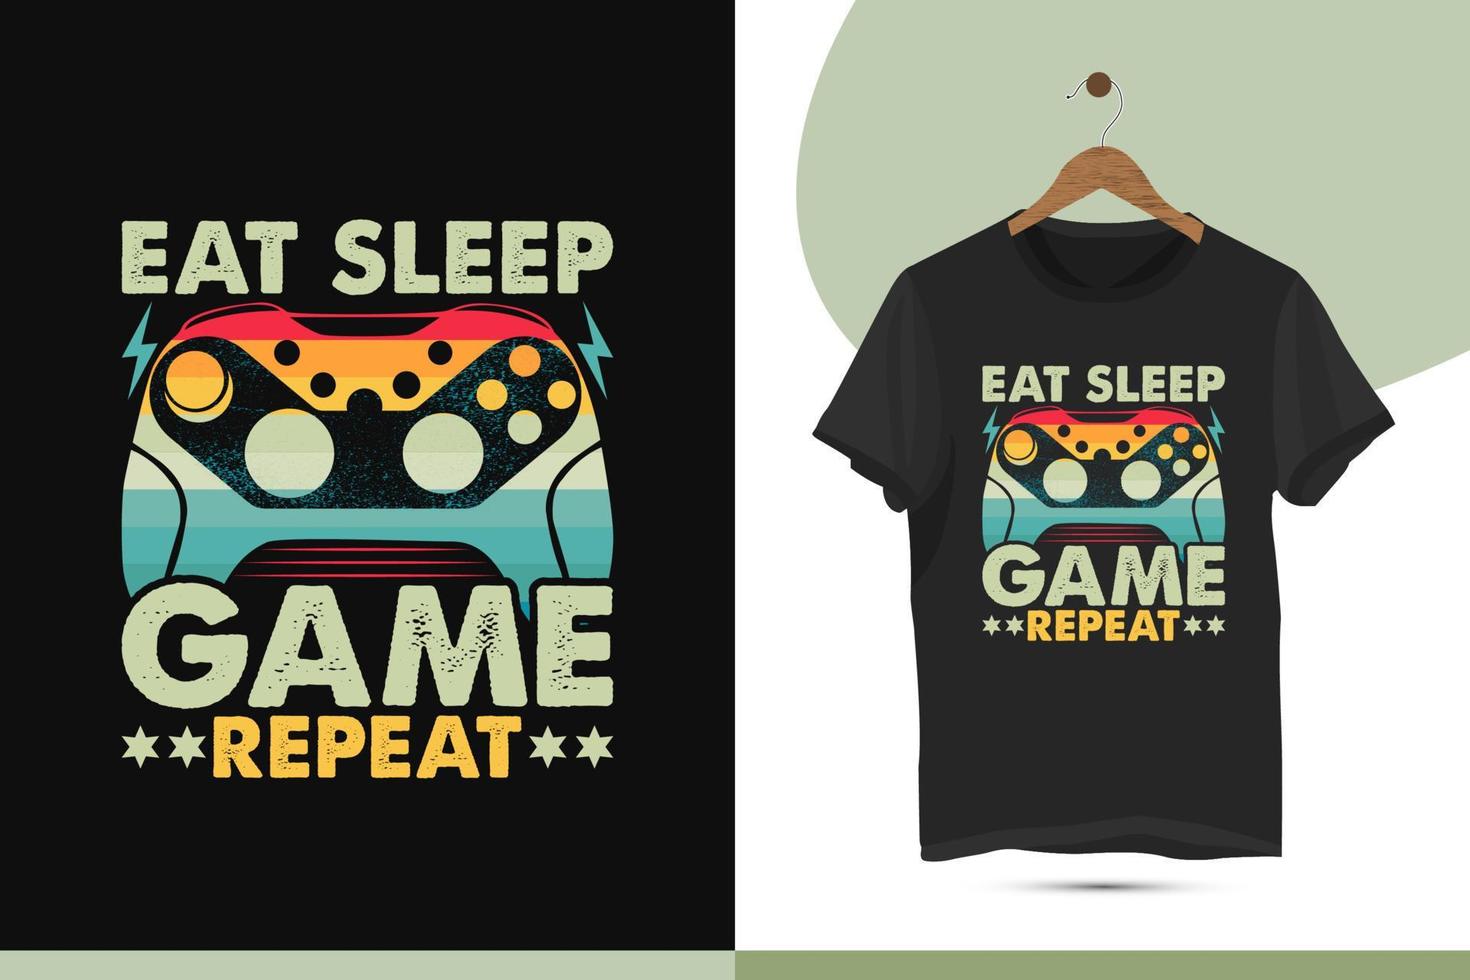 Eat sleep game repeat - Vintage retro color-style gaming t-shirt design template. Vector illustration With a gamepad, controller, and Grungy Effect shirt art.